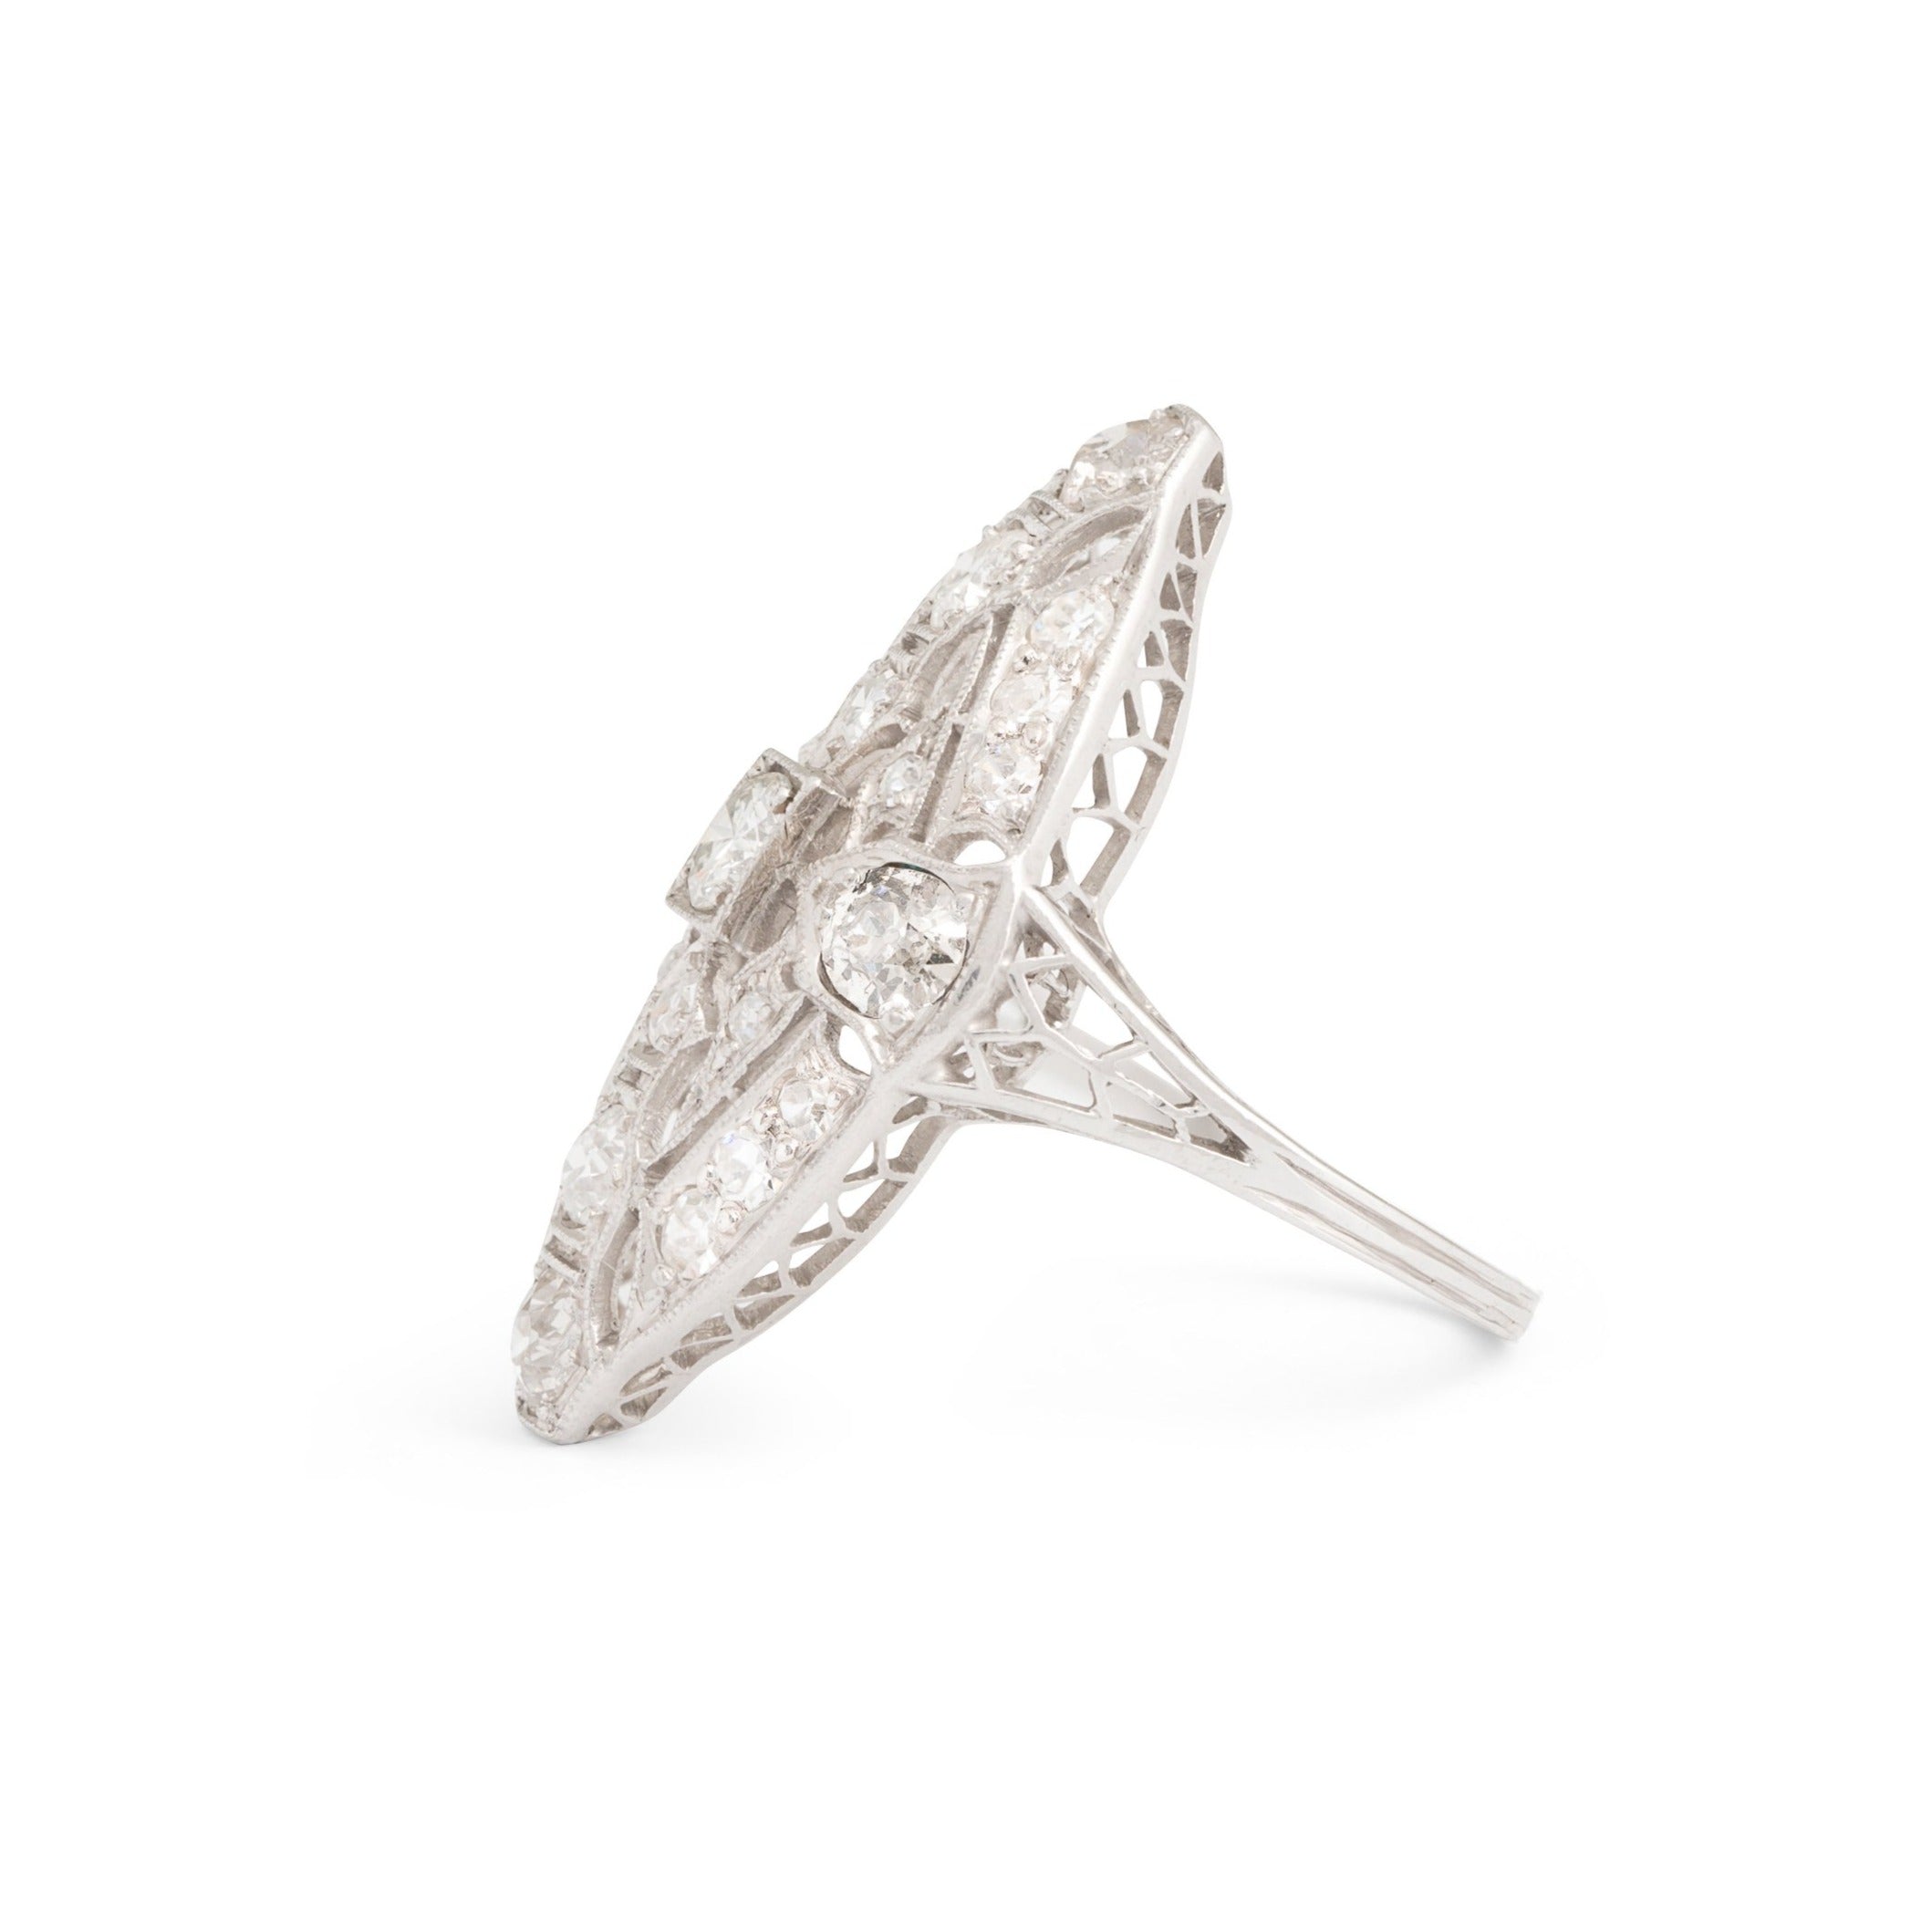 Edwardian Old Cut Diamond and Platinum Navette Ring